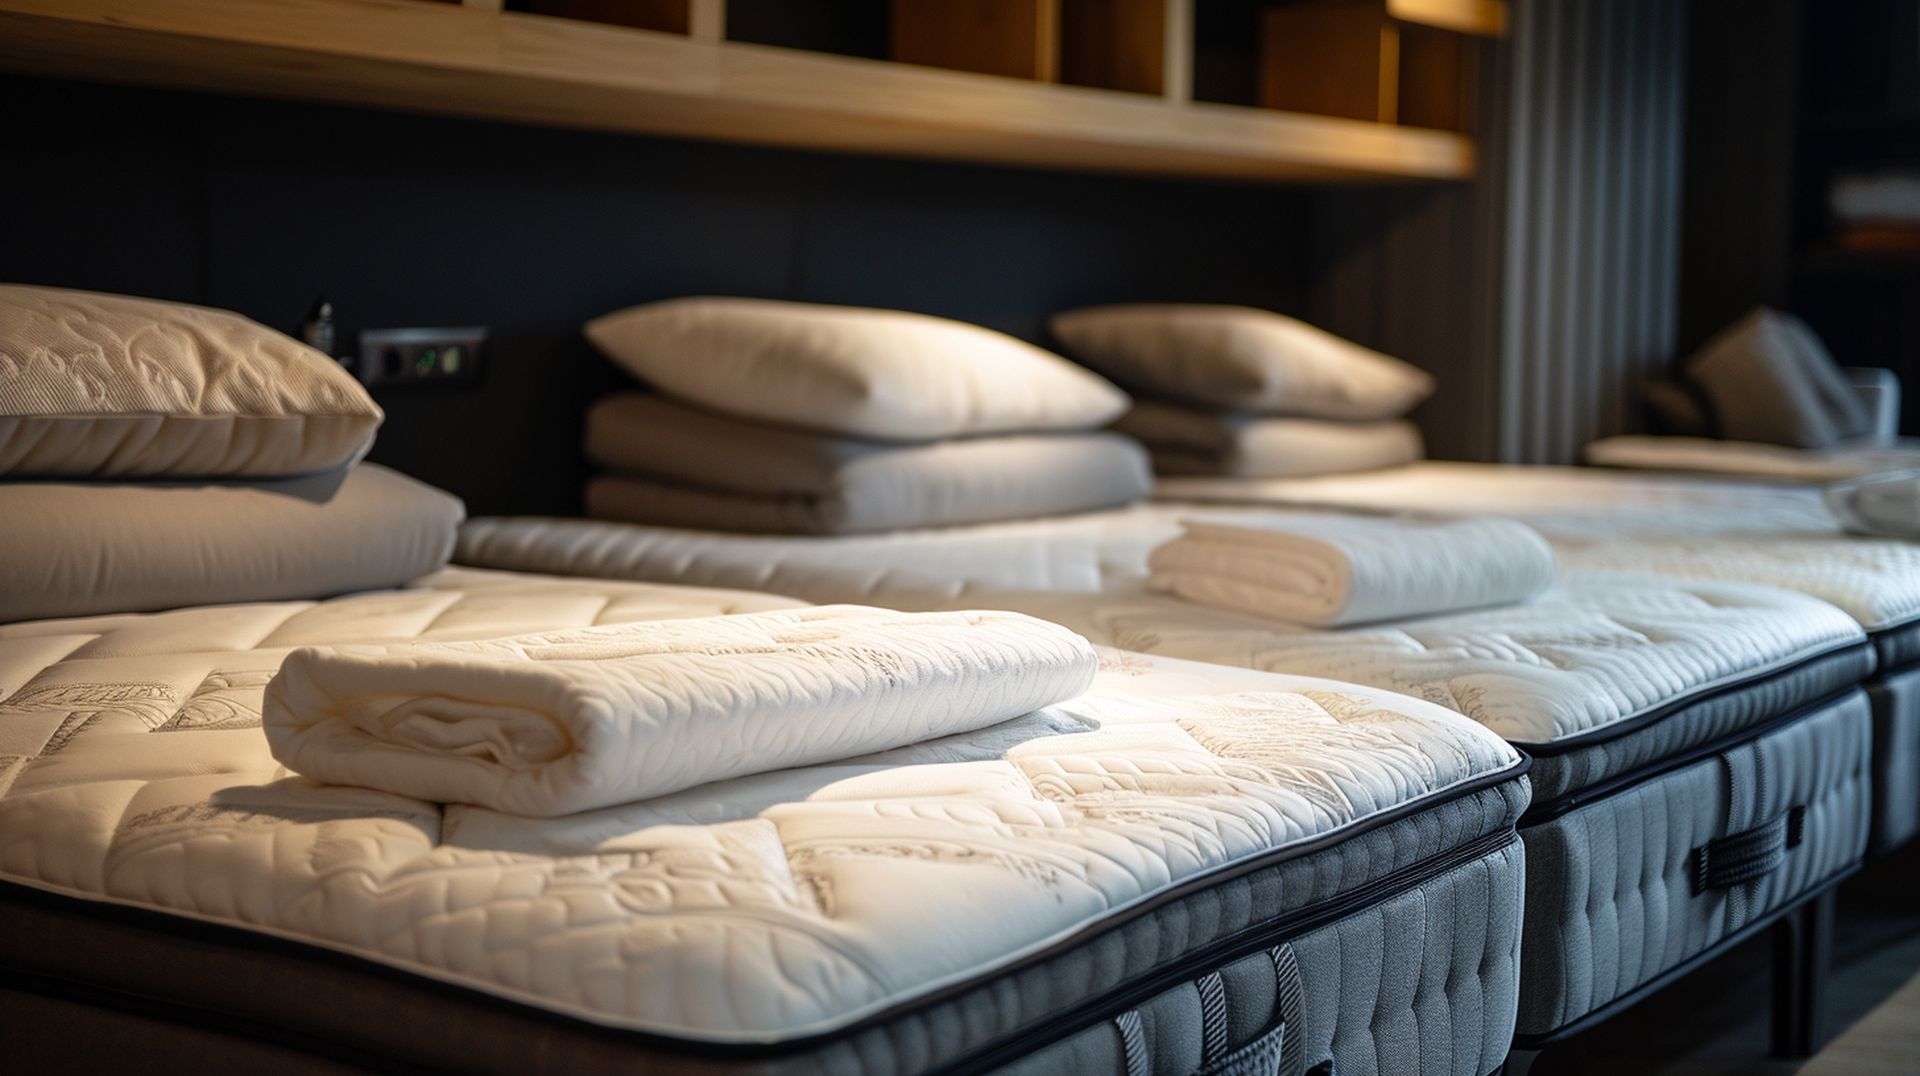 Types of mattresses at mattress dealers in Coral Springs, FL